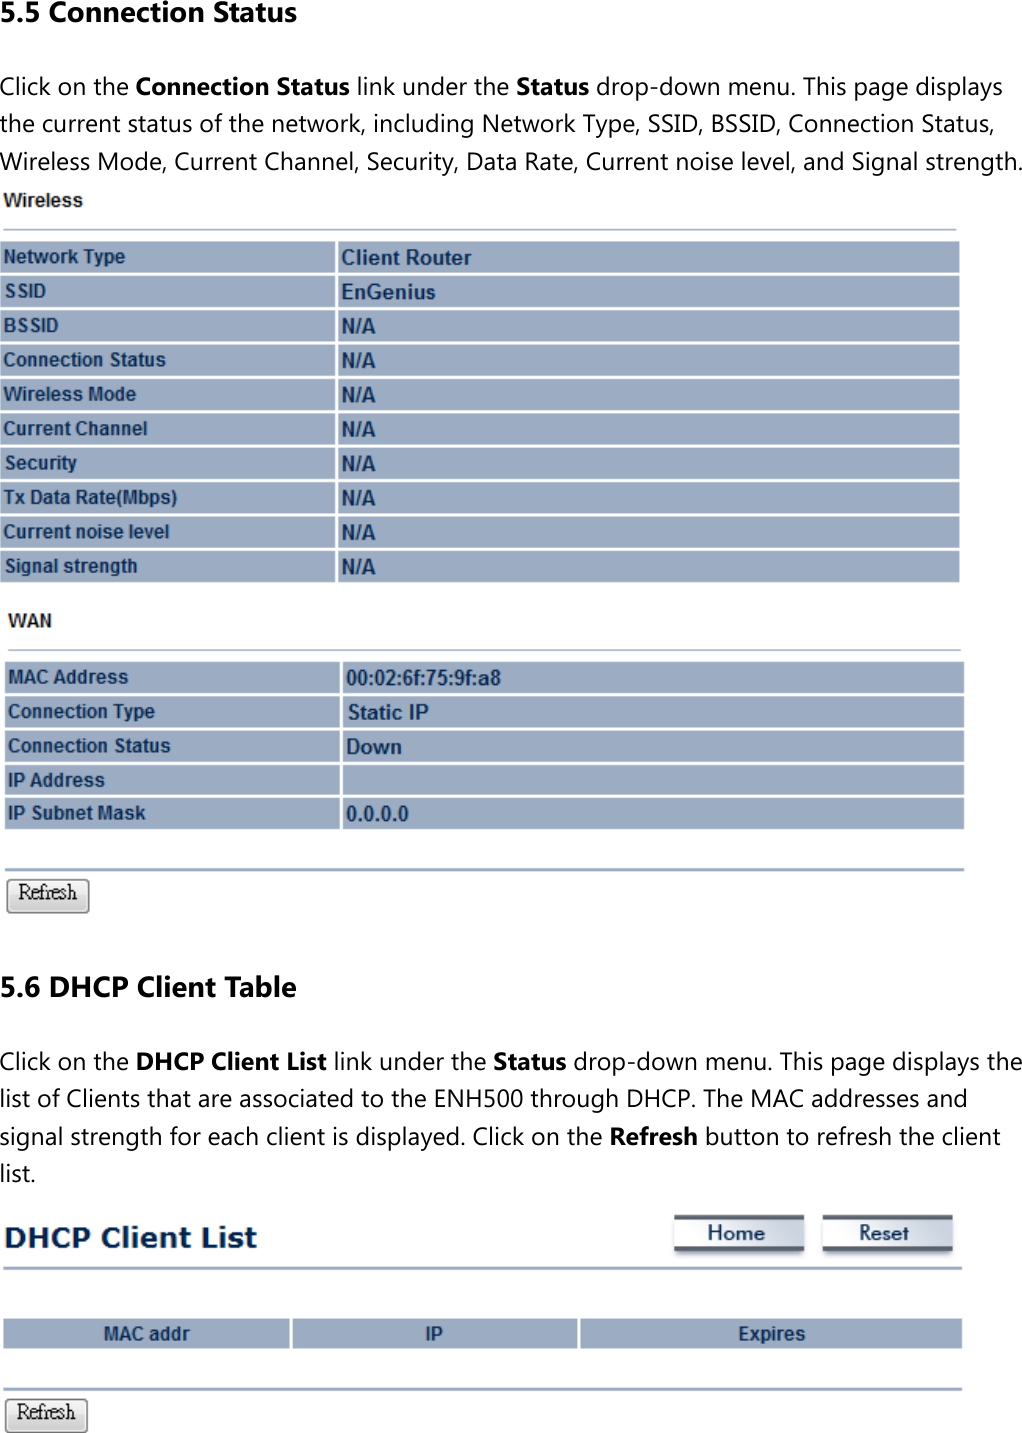 5.5 Connection Status Click on the Connection Status link under the Status drop-down menu. This page displays the current status of the network, including Network Type, SSID, BSSID, Connection Status, Wireless Mode, Current Channel, Security, Data Rate, Current noise level, and Signal strength.    5.6 DHCP Client Table Click on the DHCP Client List link under the Status drop-down menu. This page displays the list of Clients that are associated to the ENH500 through DHCP. The MAC addresses and signal strength for each client is displayed. Click on the Refresh button to refresh the client list.   